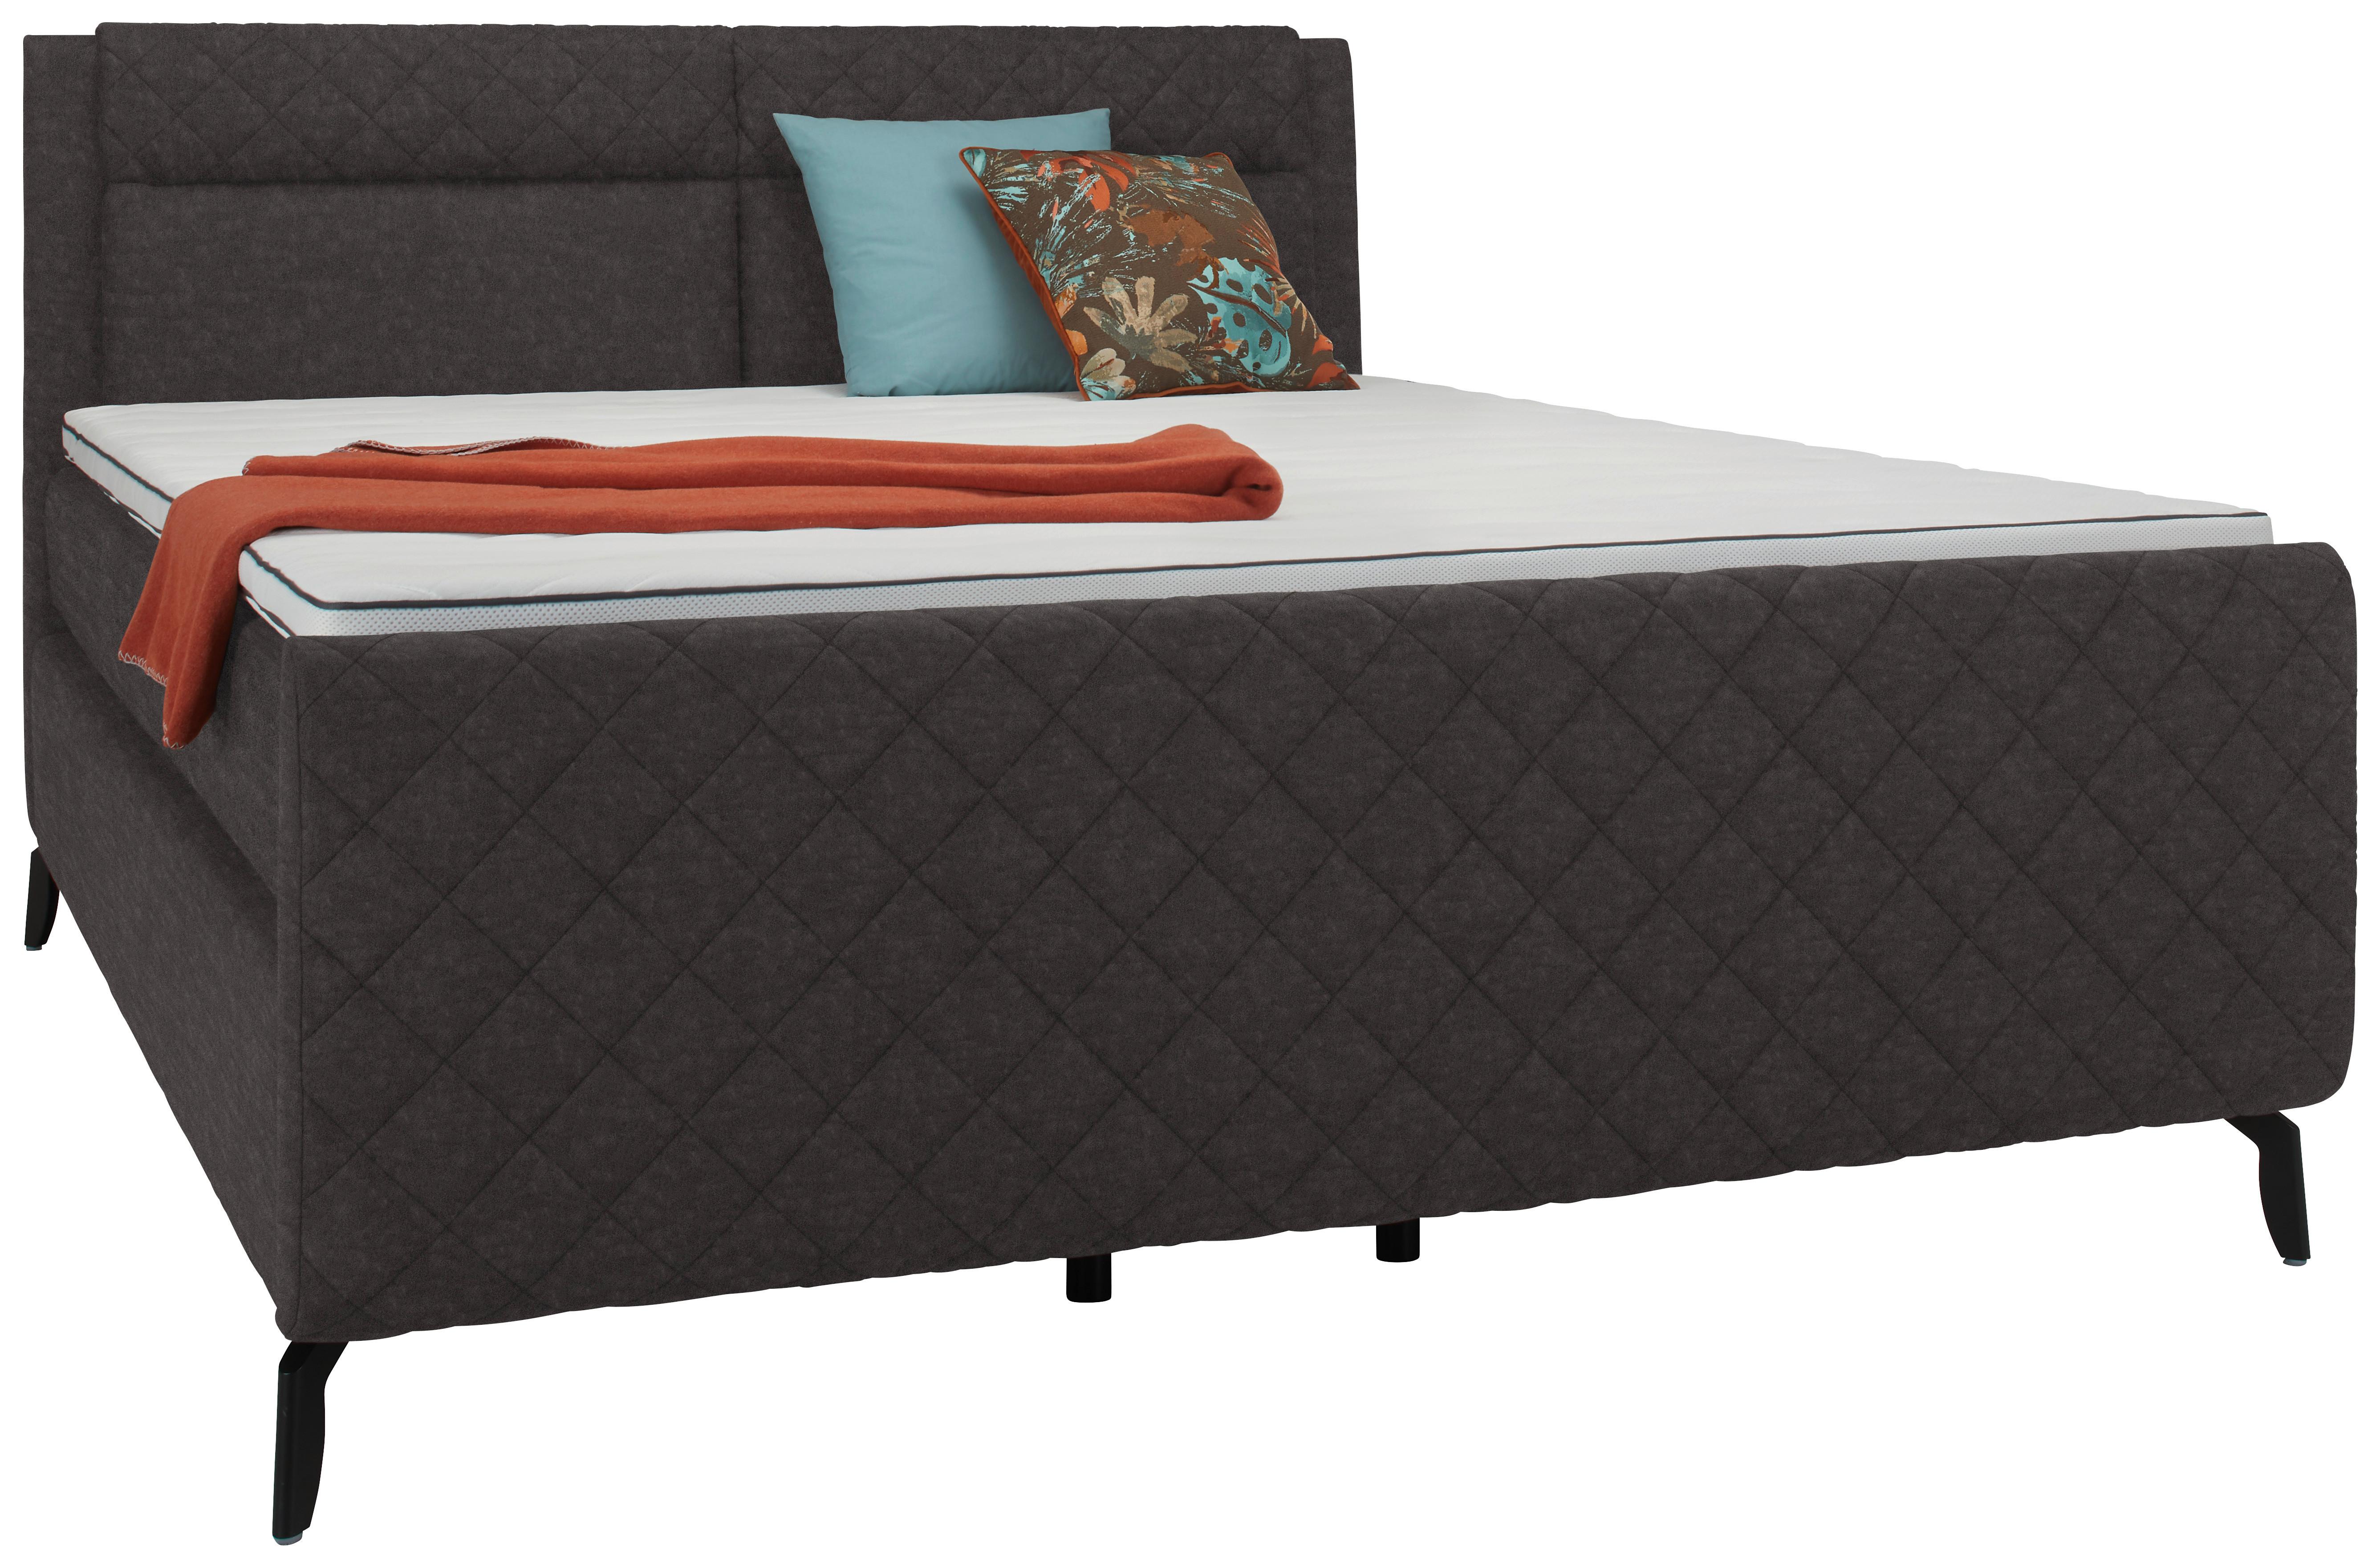 Boxspringbett in Taupe ca. 160x200cm - Taupe/Schwarz, KONVENTIONELL, Holz/Kunststoff (160/200cm)